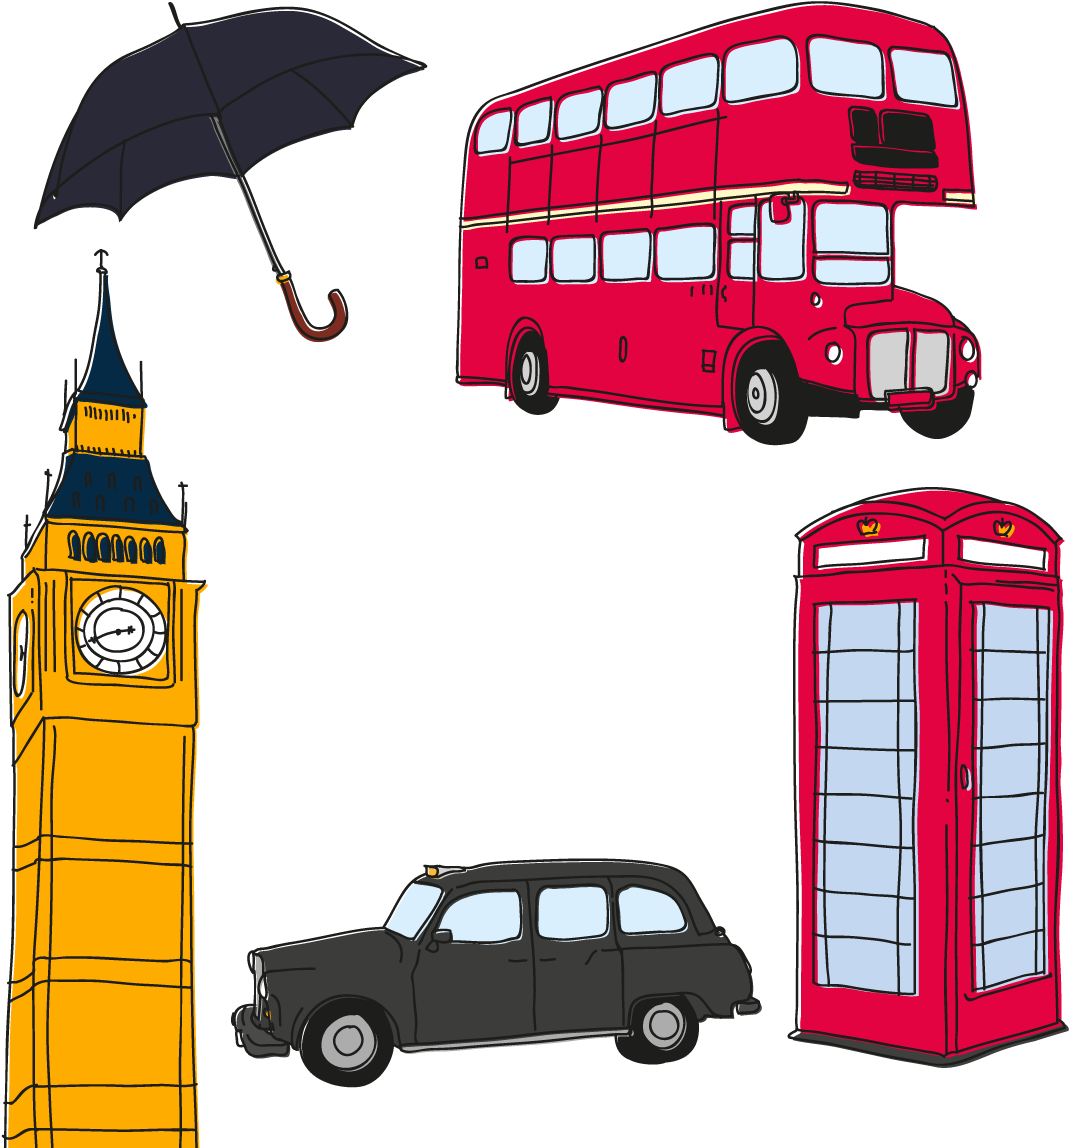 Vector Double-decker Bus 1200*1200 Transprent Png Free - Vector Double-decker Bus 1200*1200 Transprent Png Free (1200x1200)